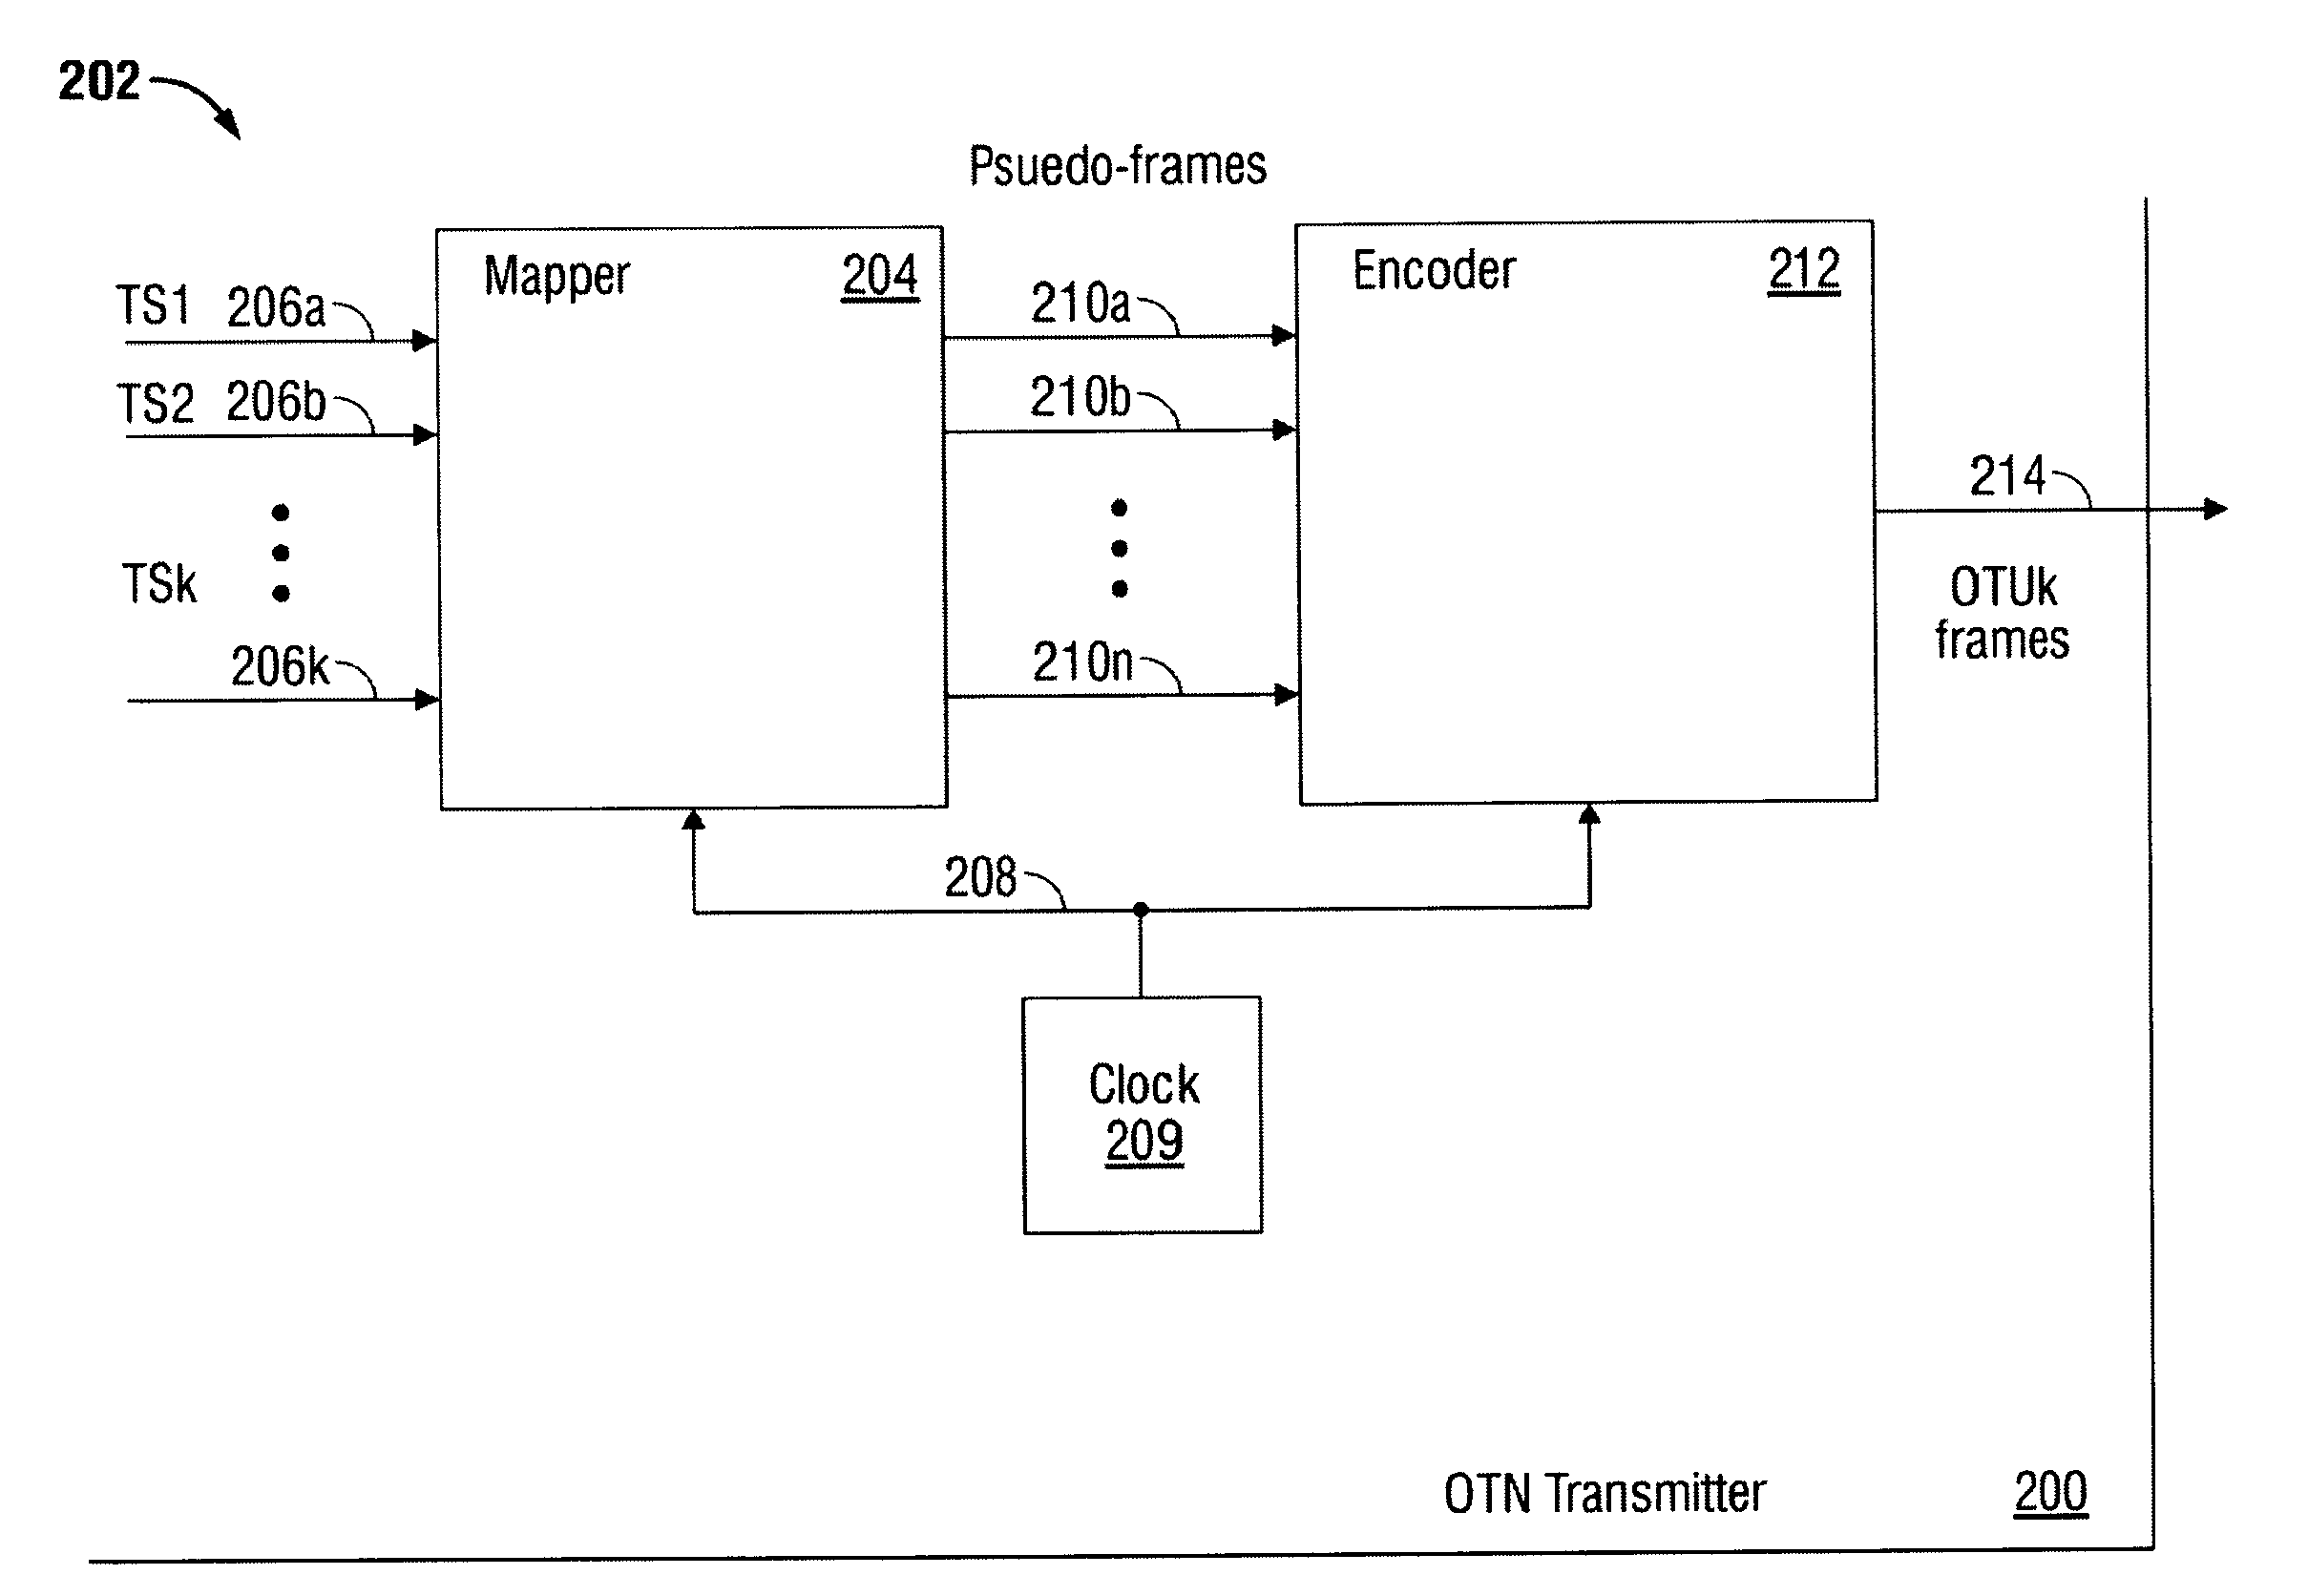 System and method for transporting asynchronous ODUk signals over a synchronous interface